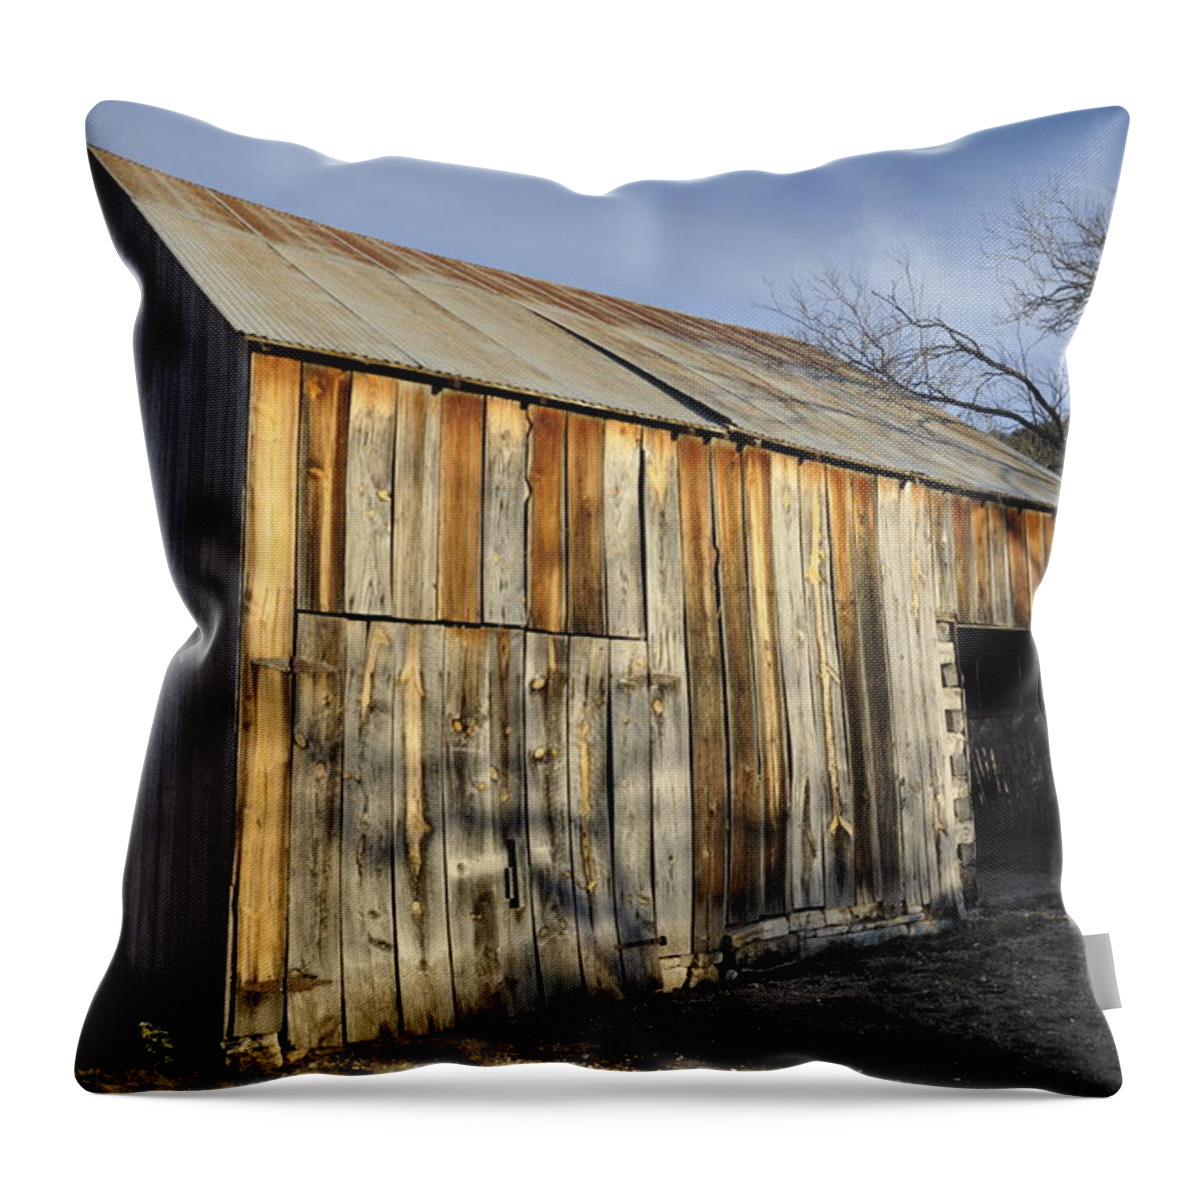 Barn Throw Pillow featuring the photograph Old Barn by Frank Madia